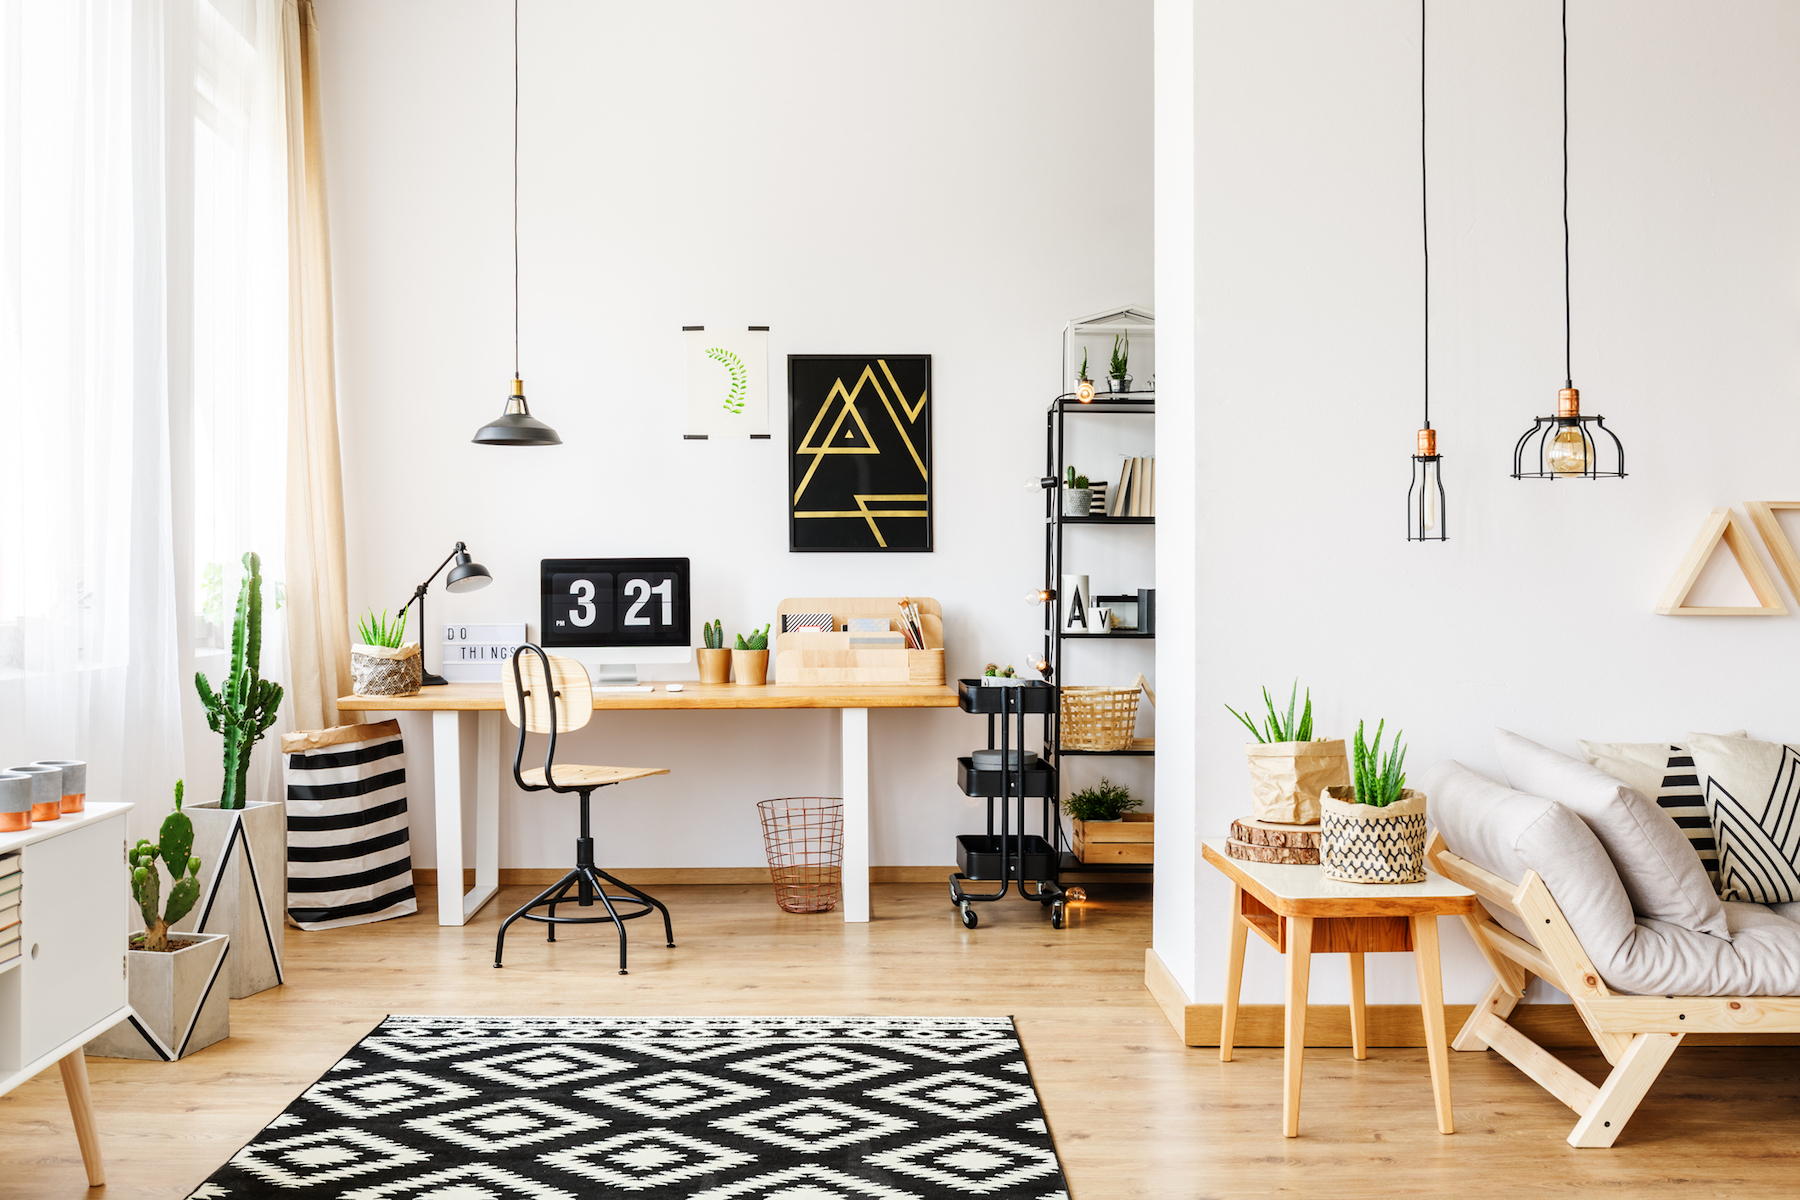 Black and white geometric carpet in multifuncional workspace with painting on wall above desk